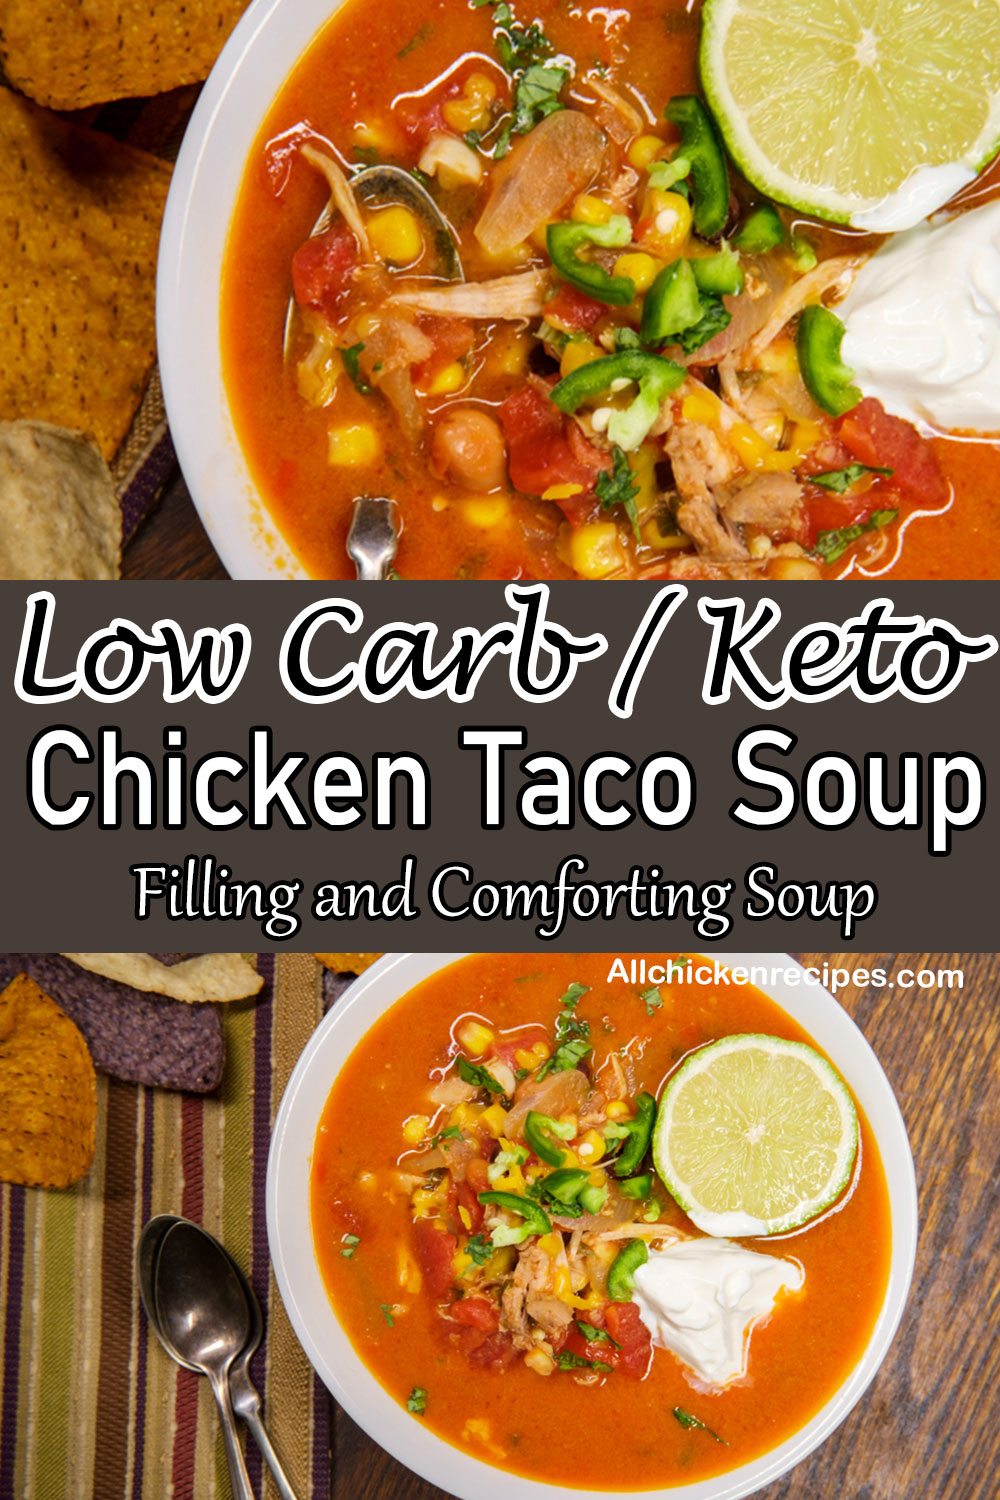 Keto Chicken Taco Soup - [Low Carb] {Stovetop, Instant Pot, Slow Cooker}